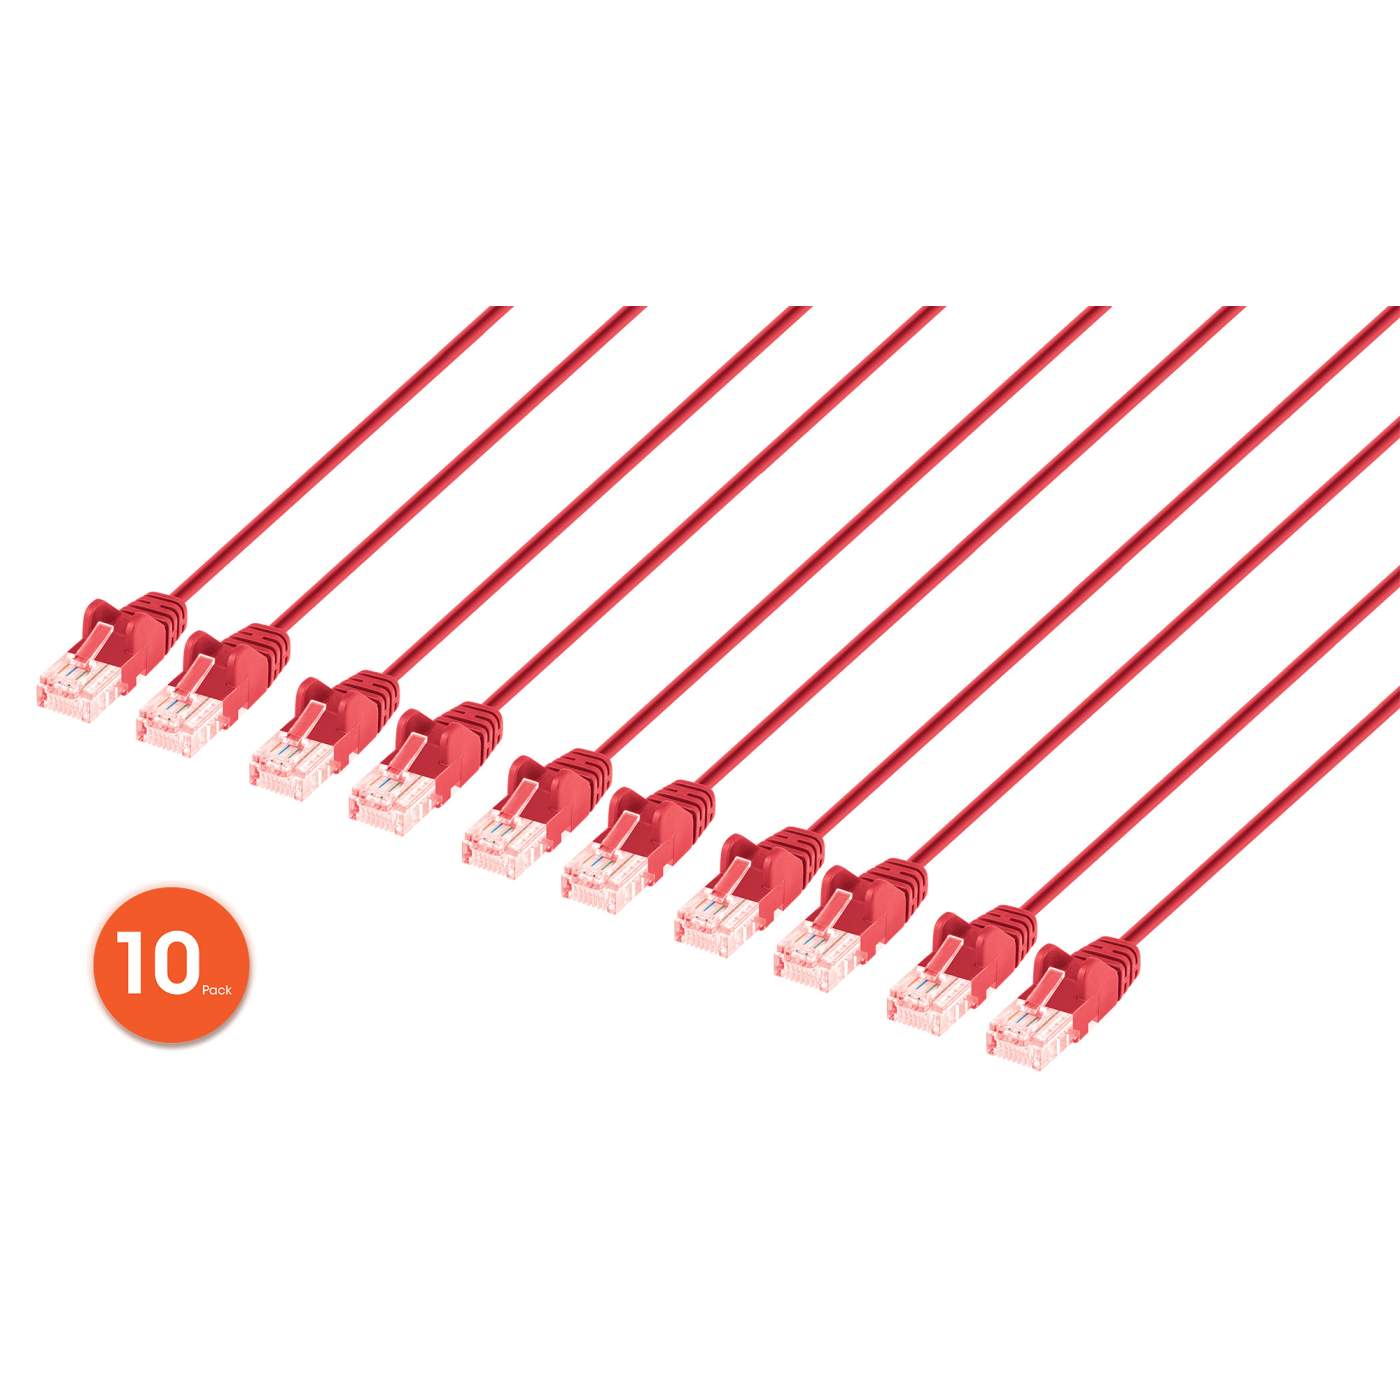 Cat6 U/UTP Slim Network Patch Cable, 7 ft., Red, 10-Pack Image 1